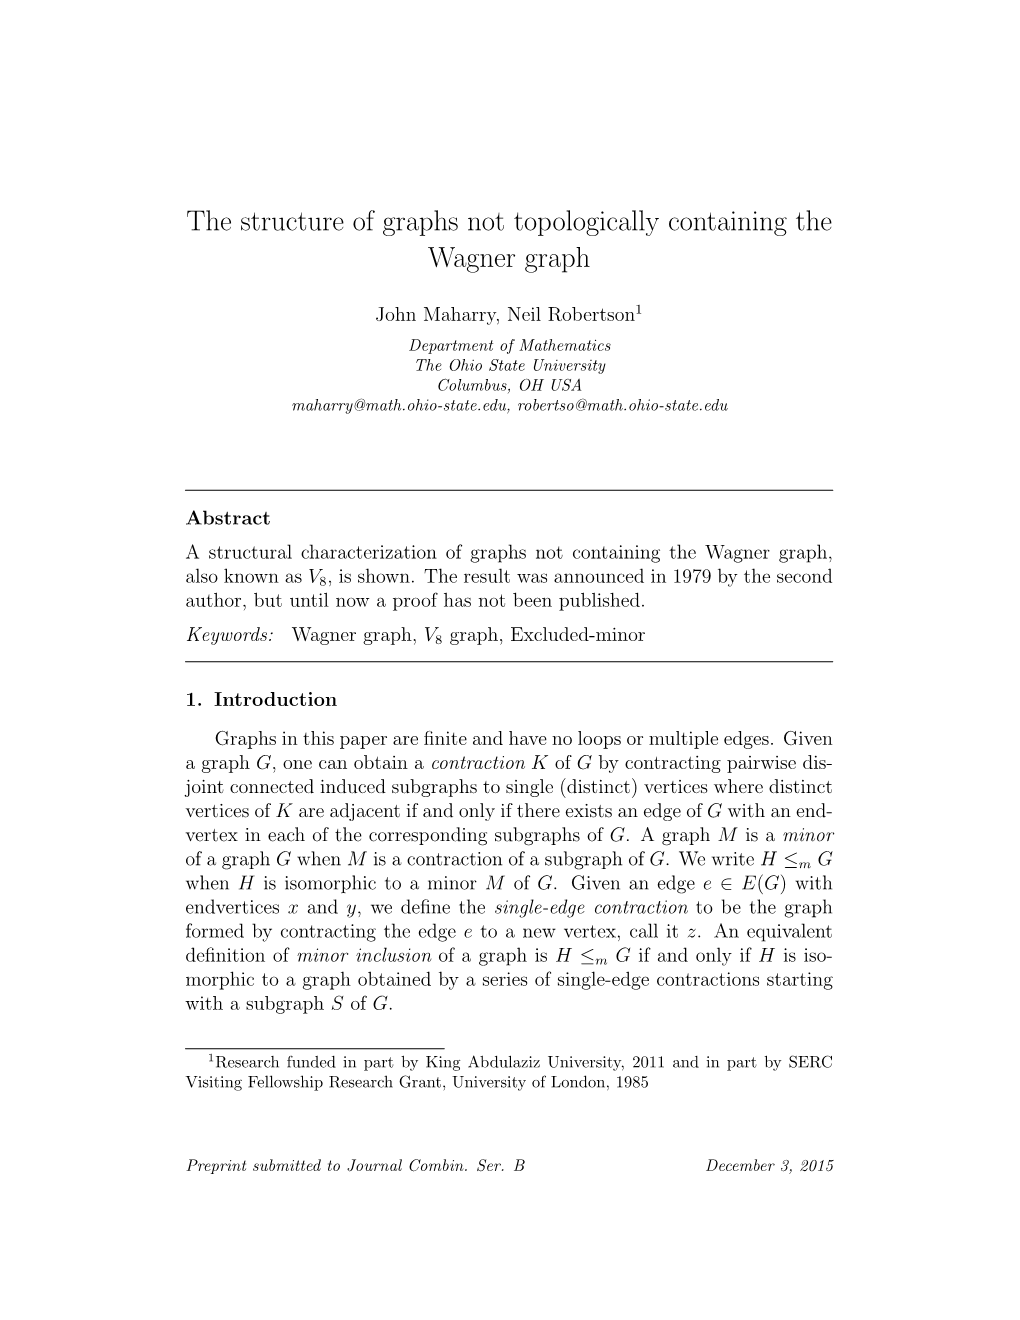 The Structure of Graphs Not Topologically Containing the Wagner Graph